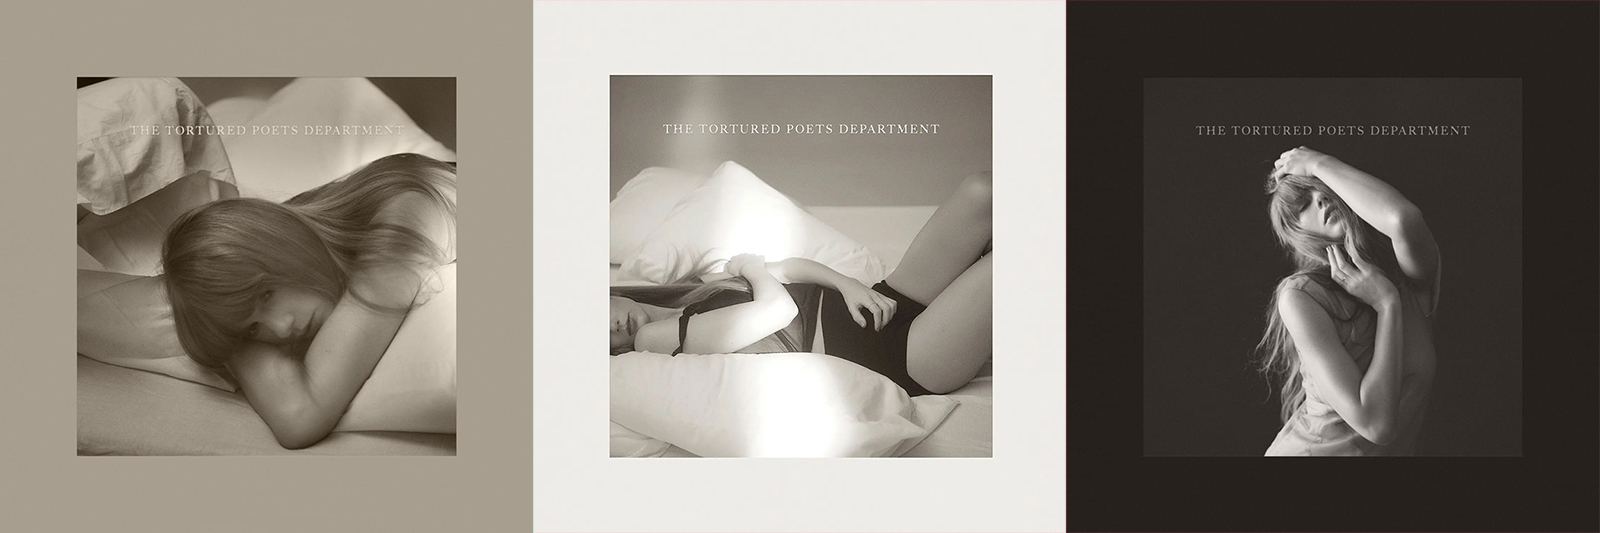 Artwork for Taylor Swift's "The Tortured Poets Department" album. (Images courtesy Republic Records)